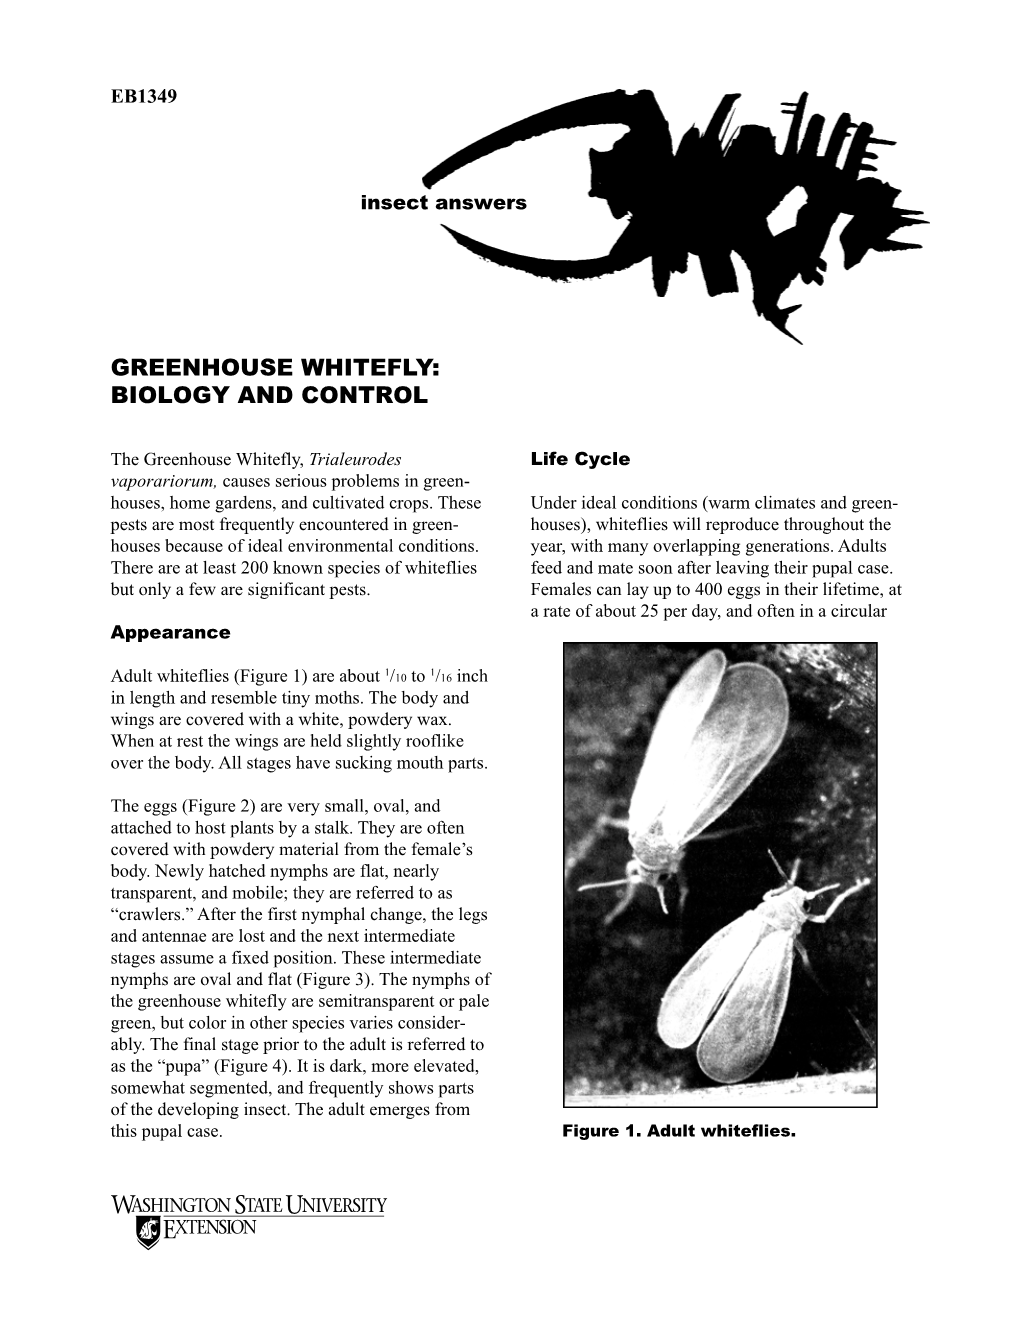 Greenhouse Whitefly: Biology and Control